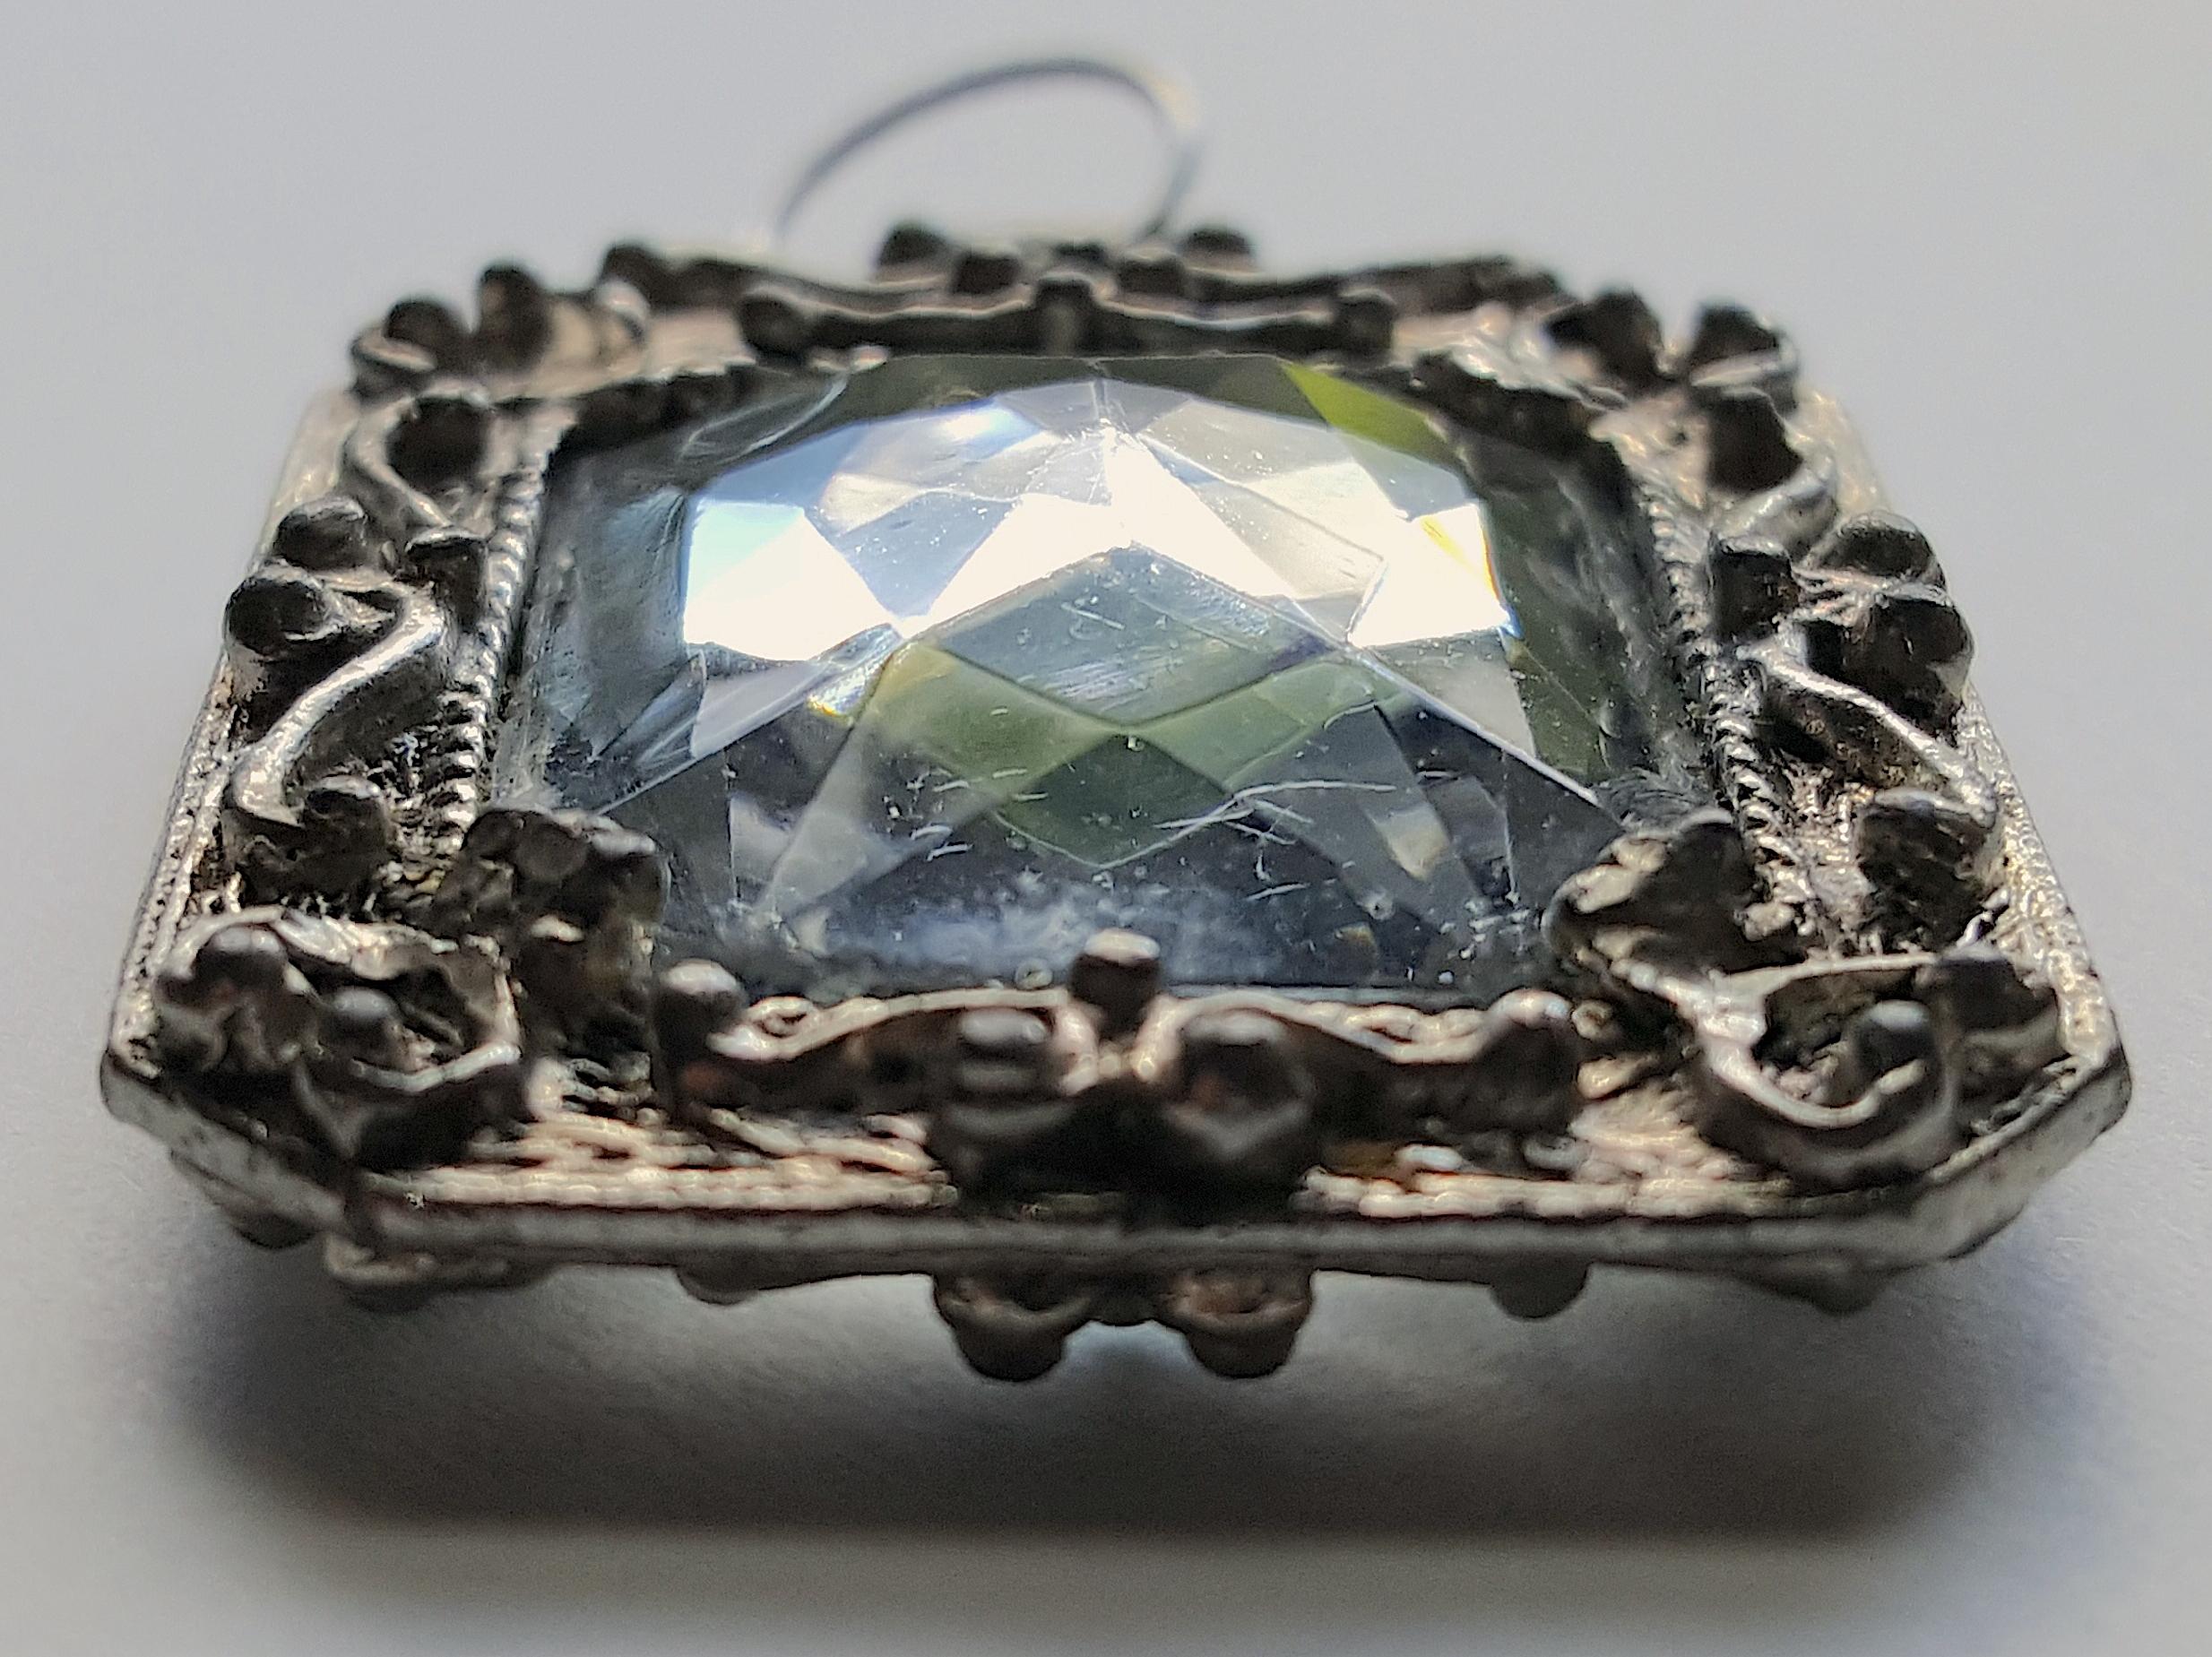 In a rare scissor cut dating to the 1500s, this centuries-old prong-set hogback rock-crystal pendant produces a fascinating play of refractions in low light. With its rectangular narrow-edge silver frame decorated with high-relief curvy scrollwork